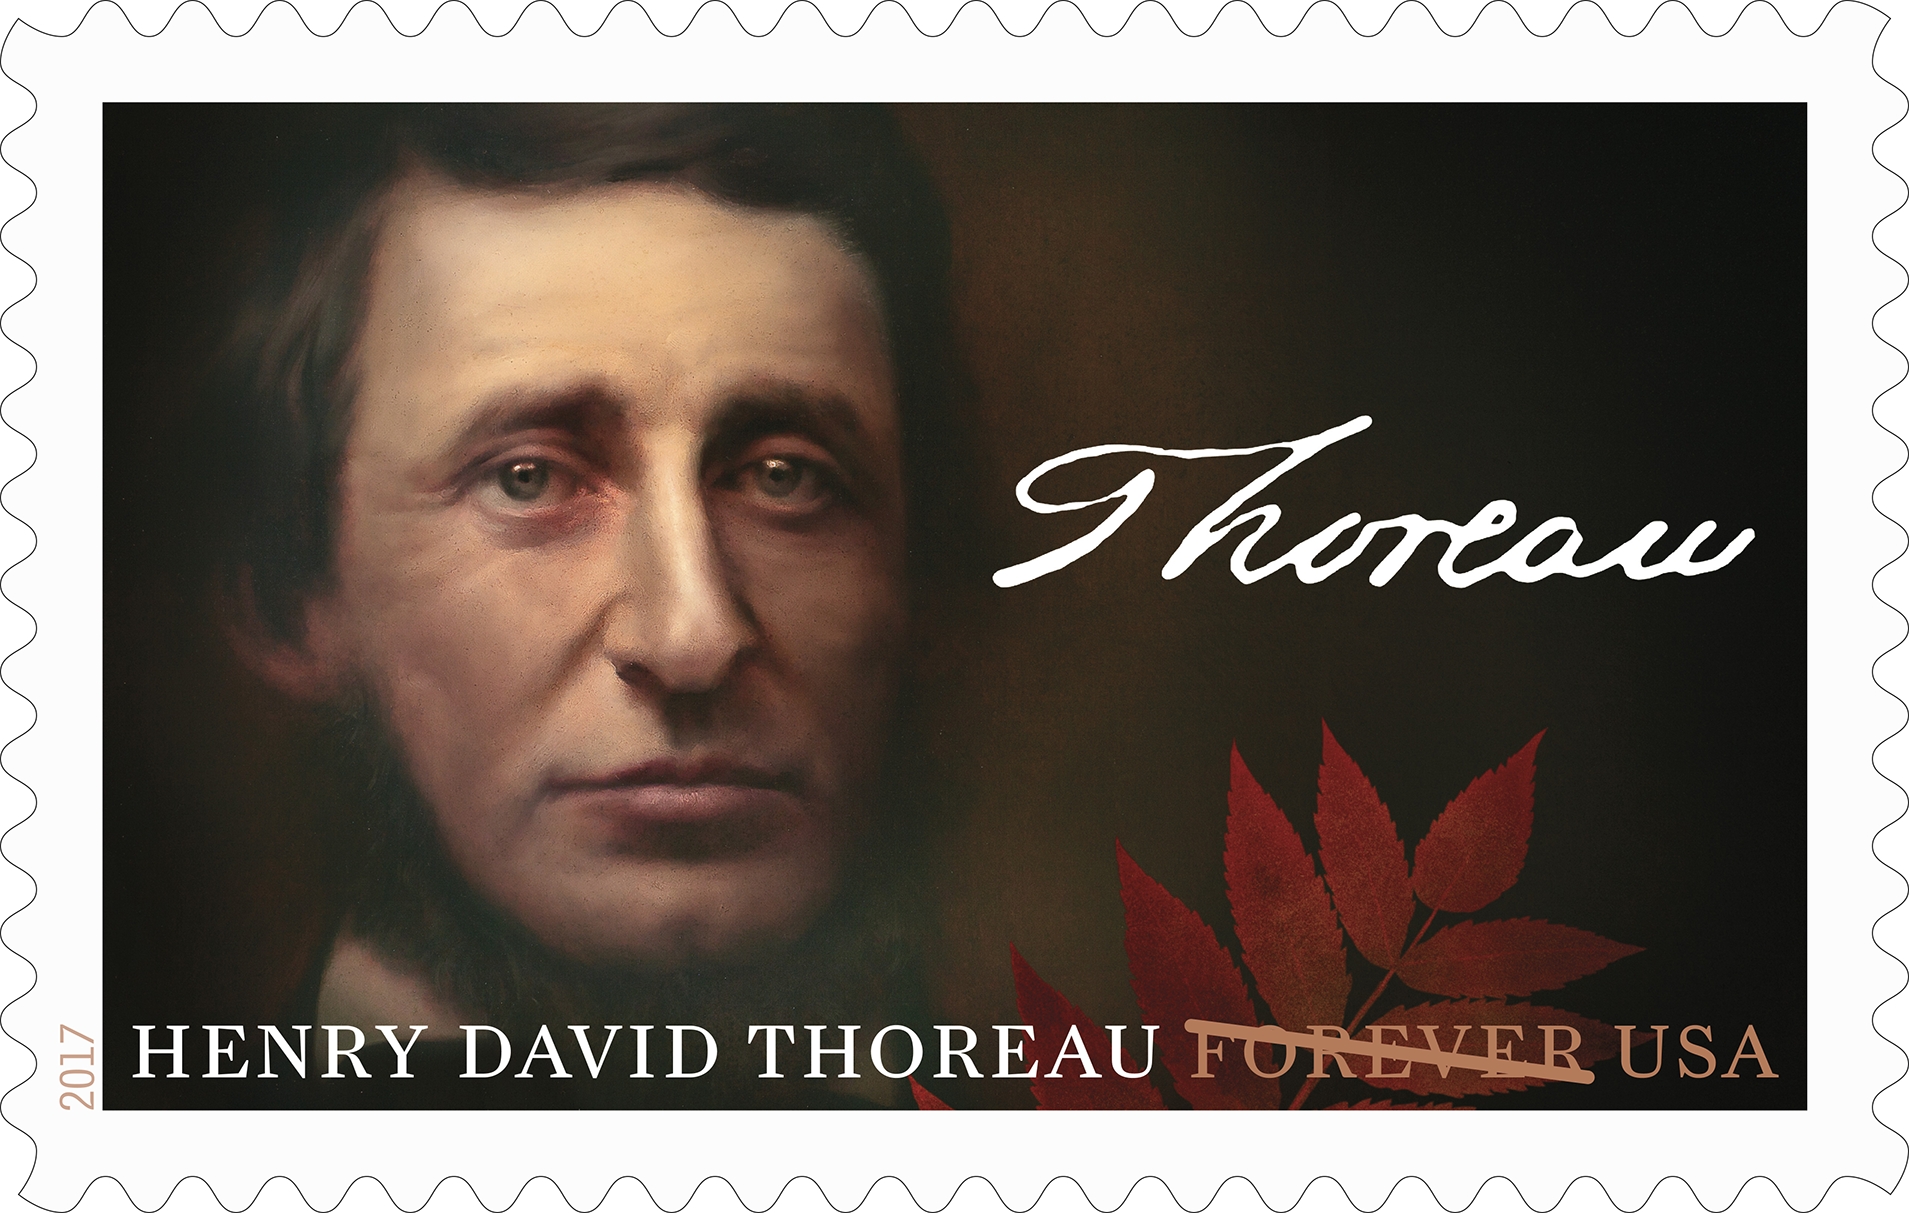 Henry David Thoreau Commemorated on a Forever Stamp Today